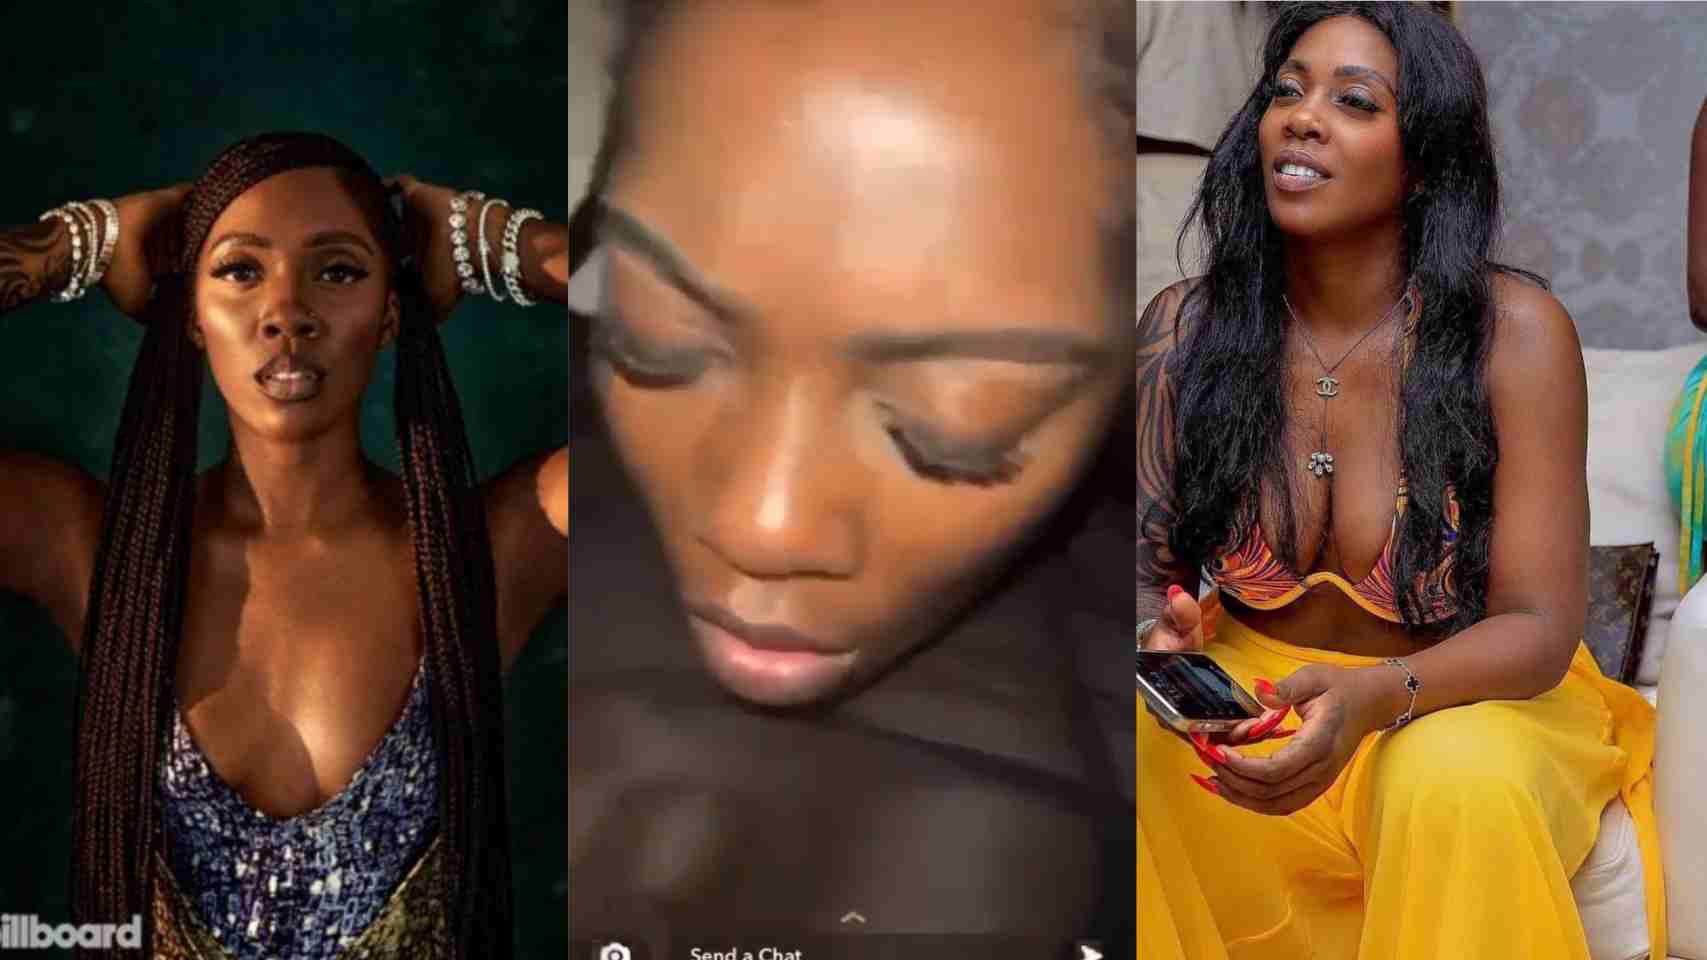 Tiwa Savage in more trouble as new info pops up about man in her viral intimate video